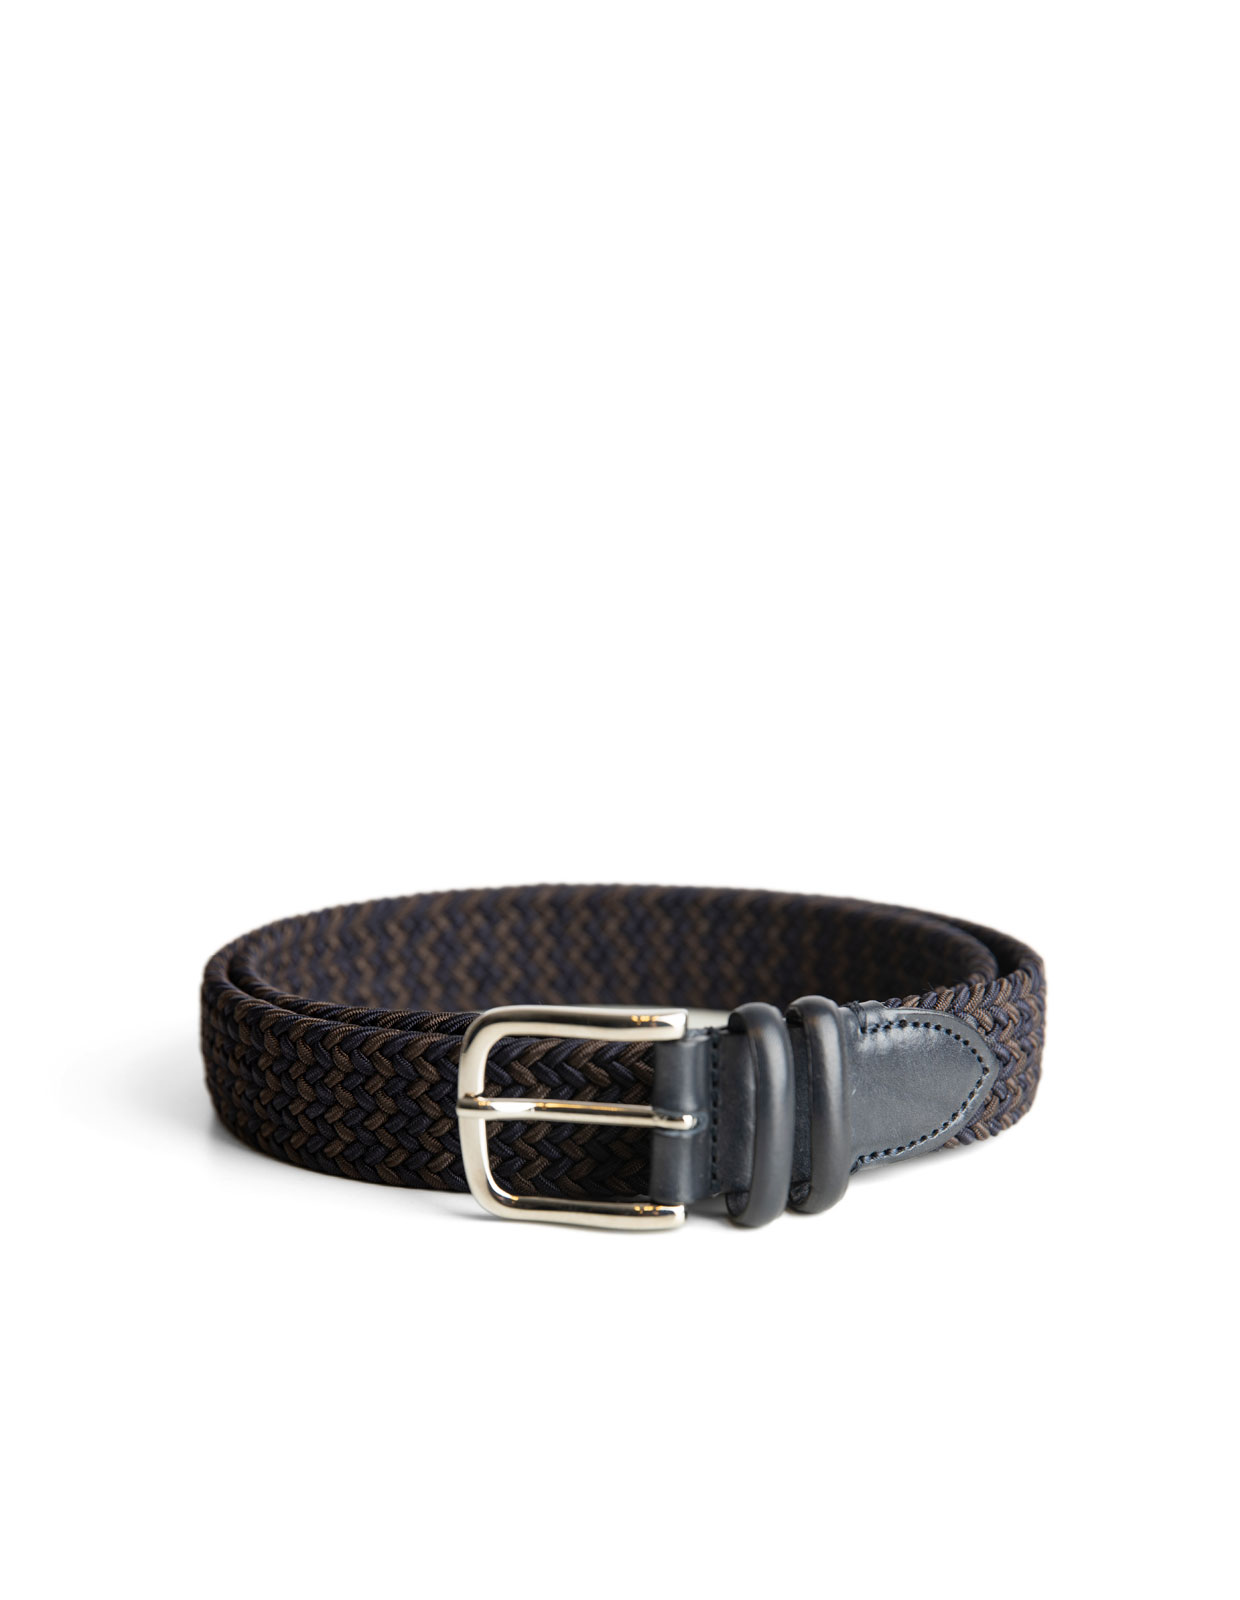 Woven Stretched Rayon Belt Navy/Brown Stl 110